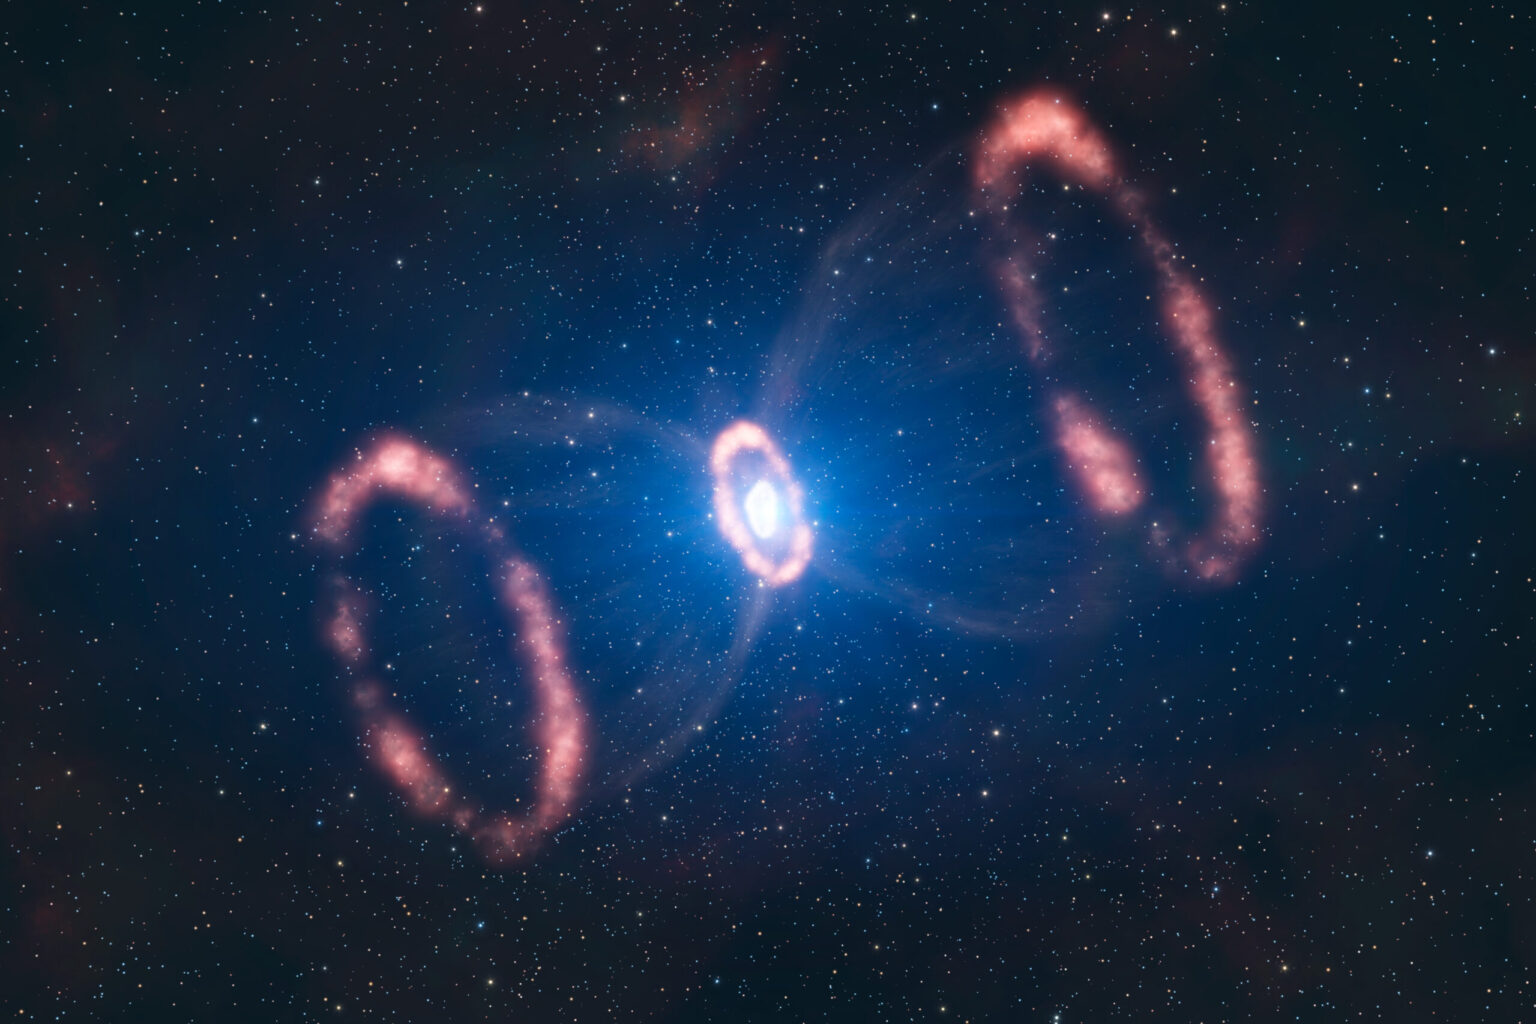 The material around SN 1987A scaled